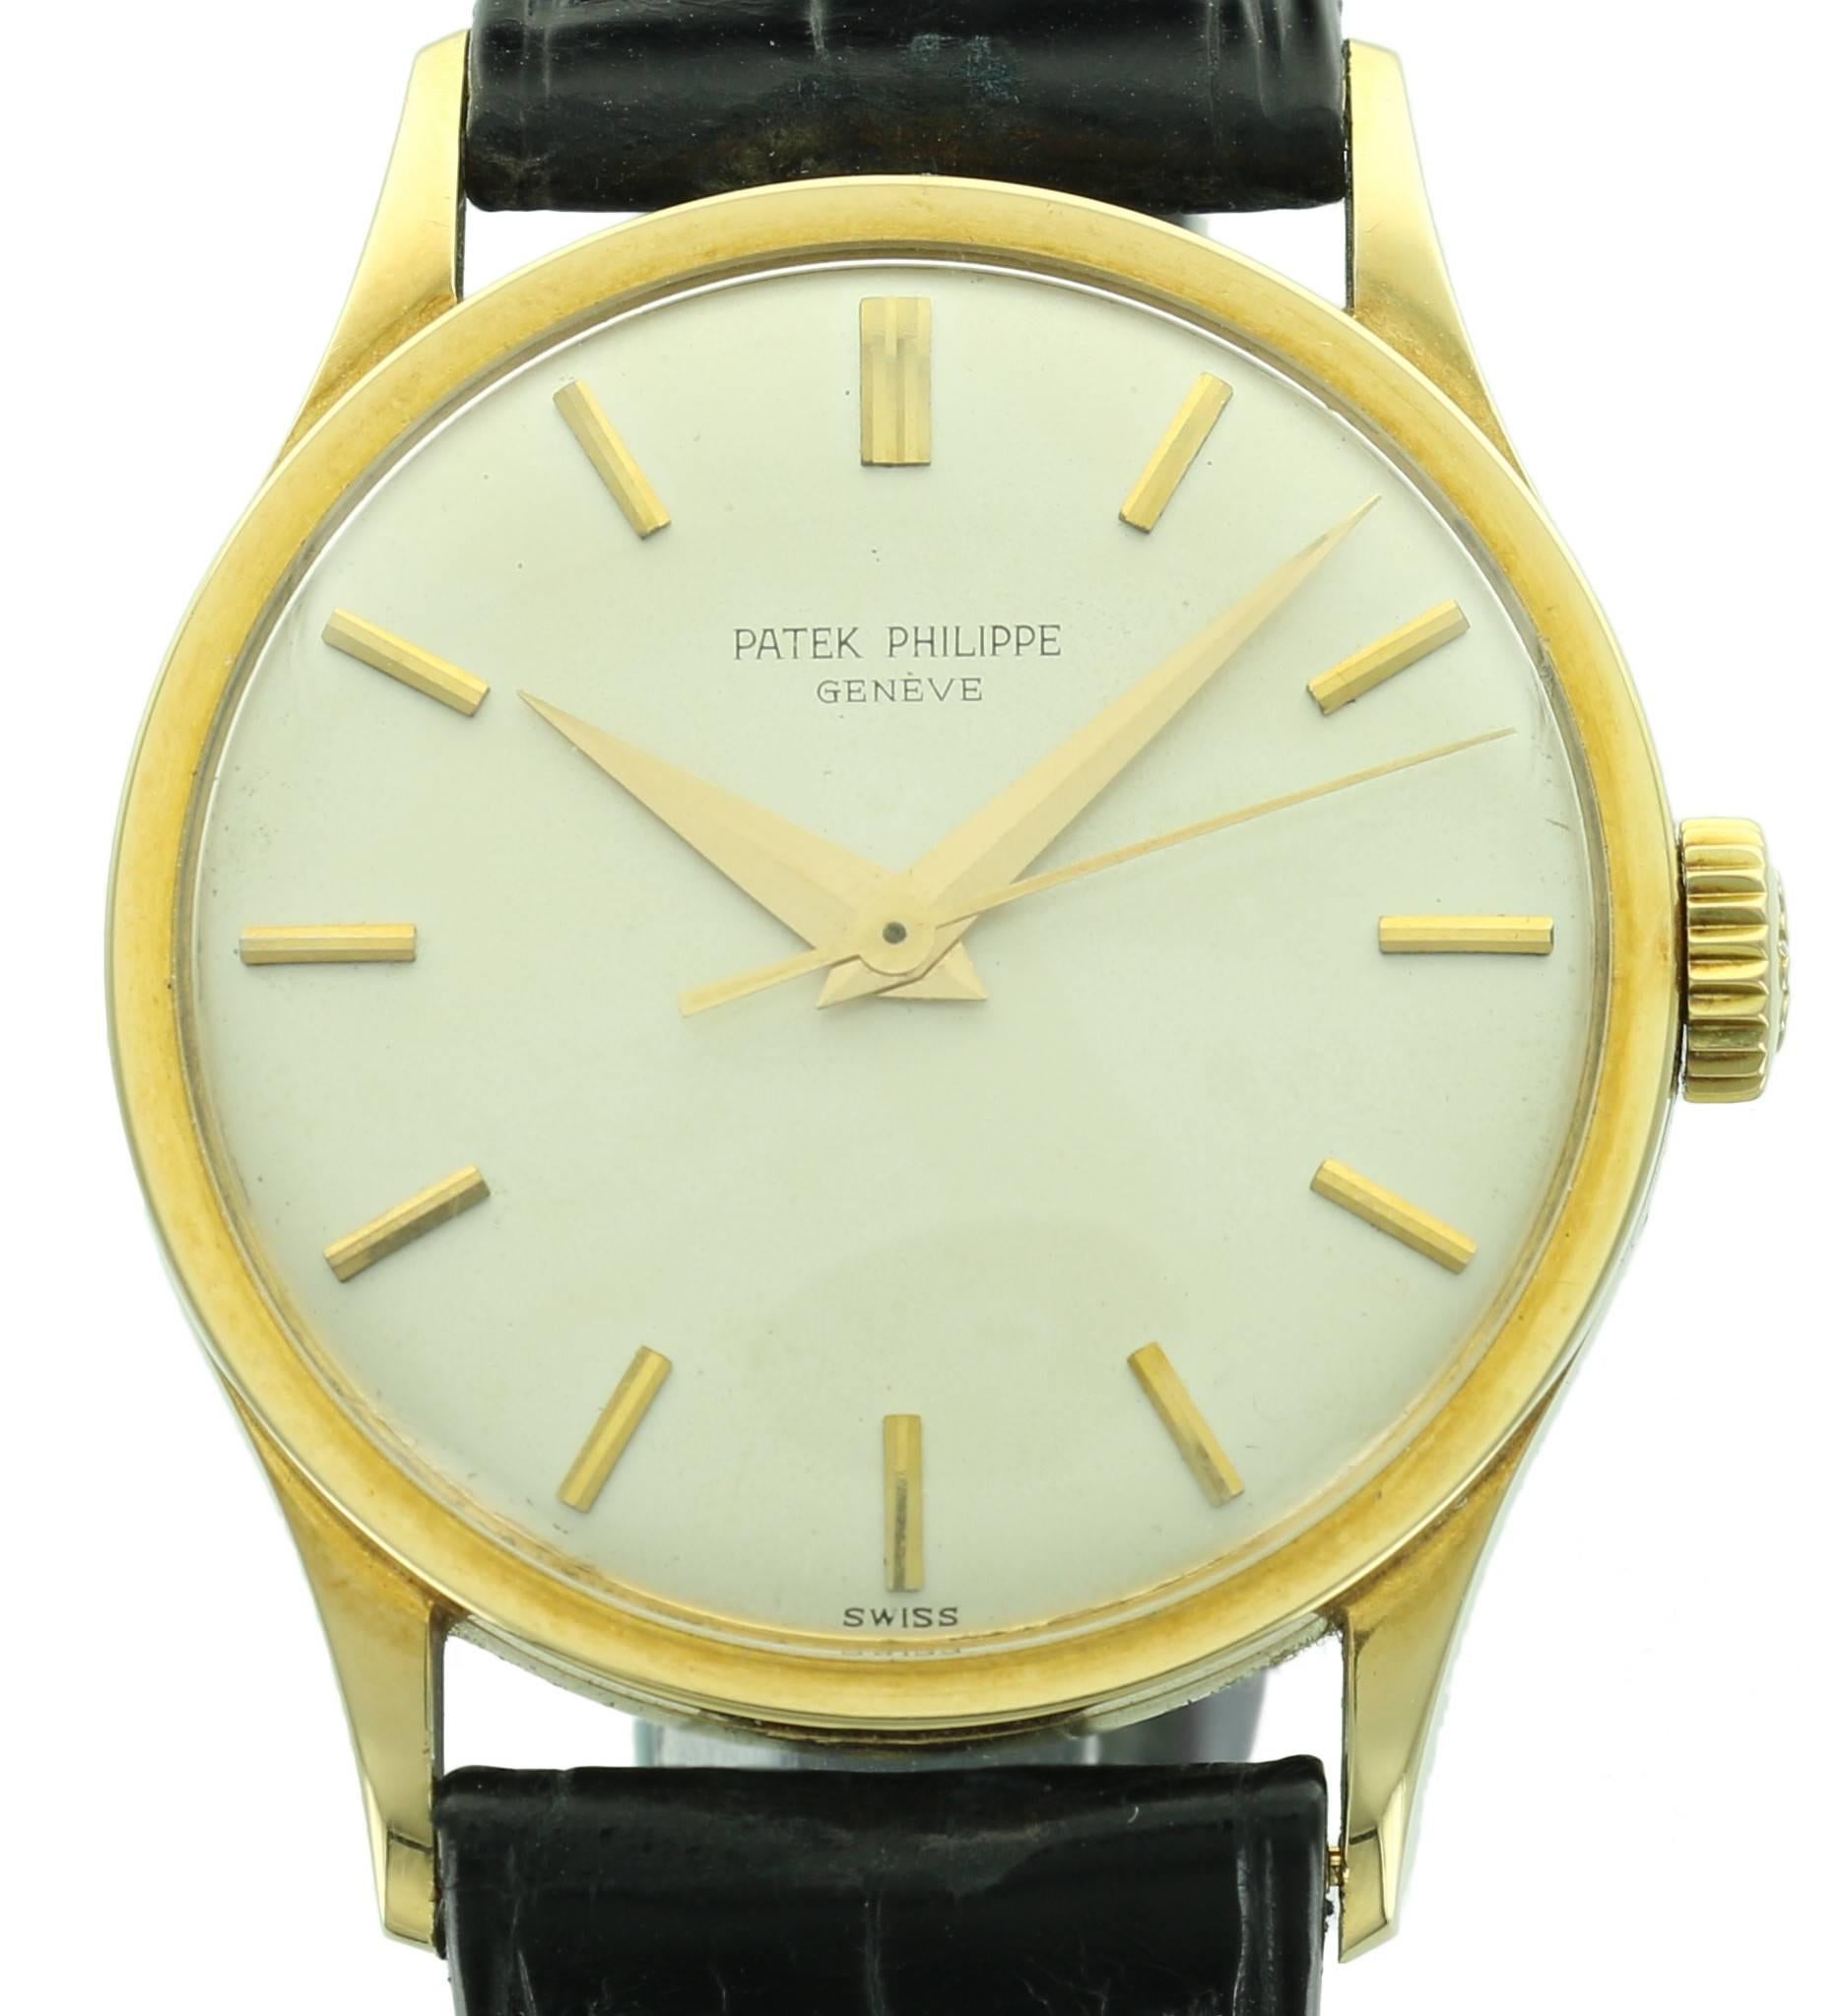 The Patek Philippe reference 570 is one of the most classic and elegant models. It is among the larger of the vintage Calatrava models, which makes it highly collectable as many of the vintage Calatrava models were quite small. This particular 570